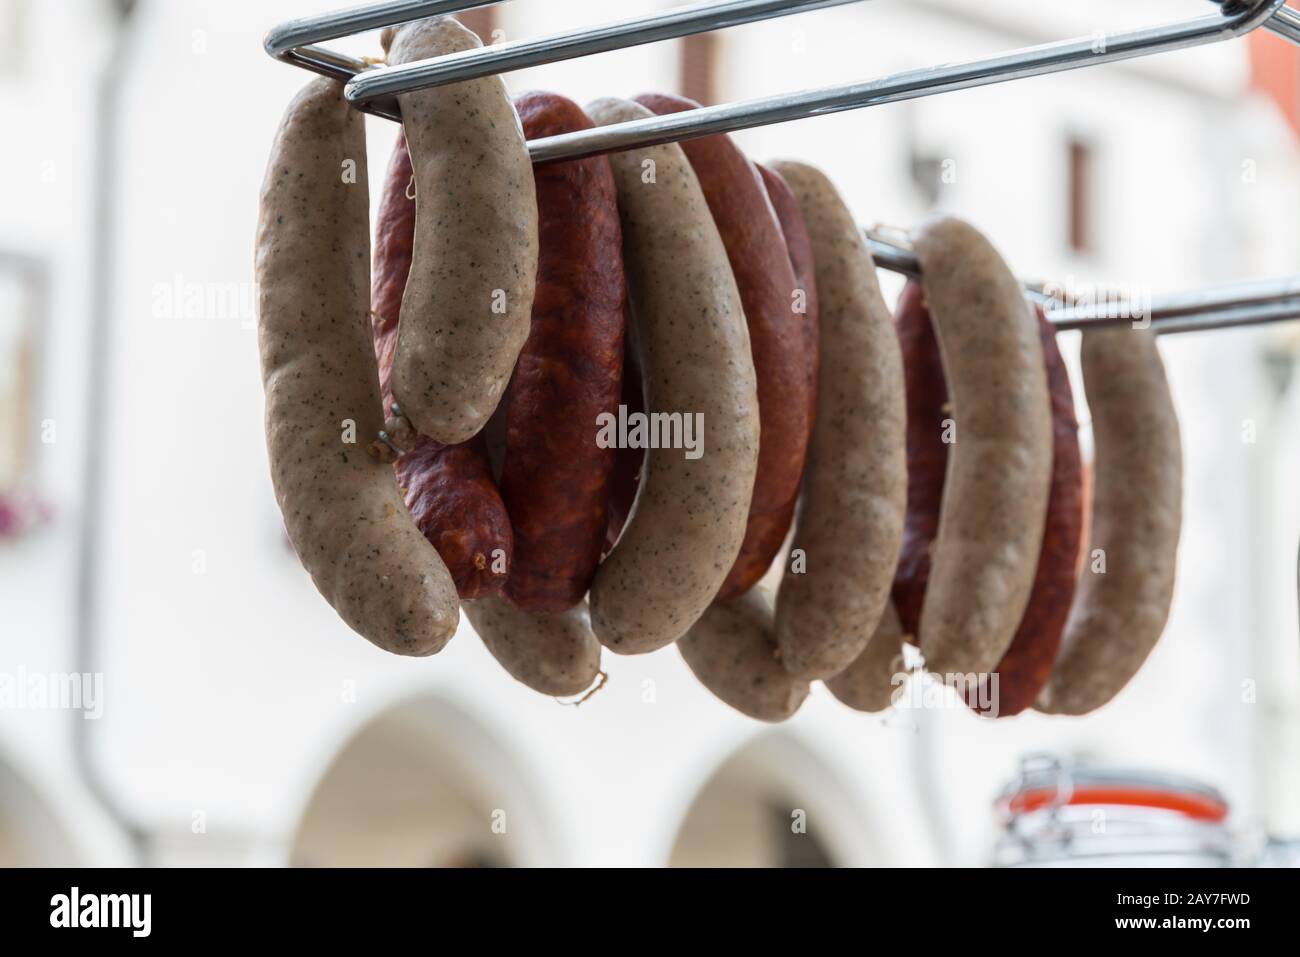 Two different types of sausages hung up - close-up and depth-of-field Stock Photo